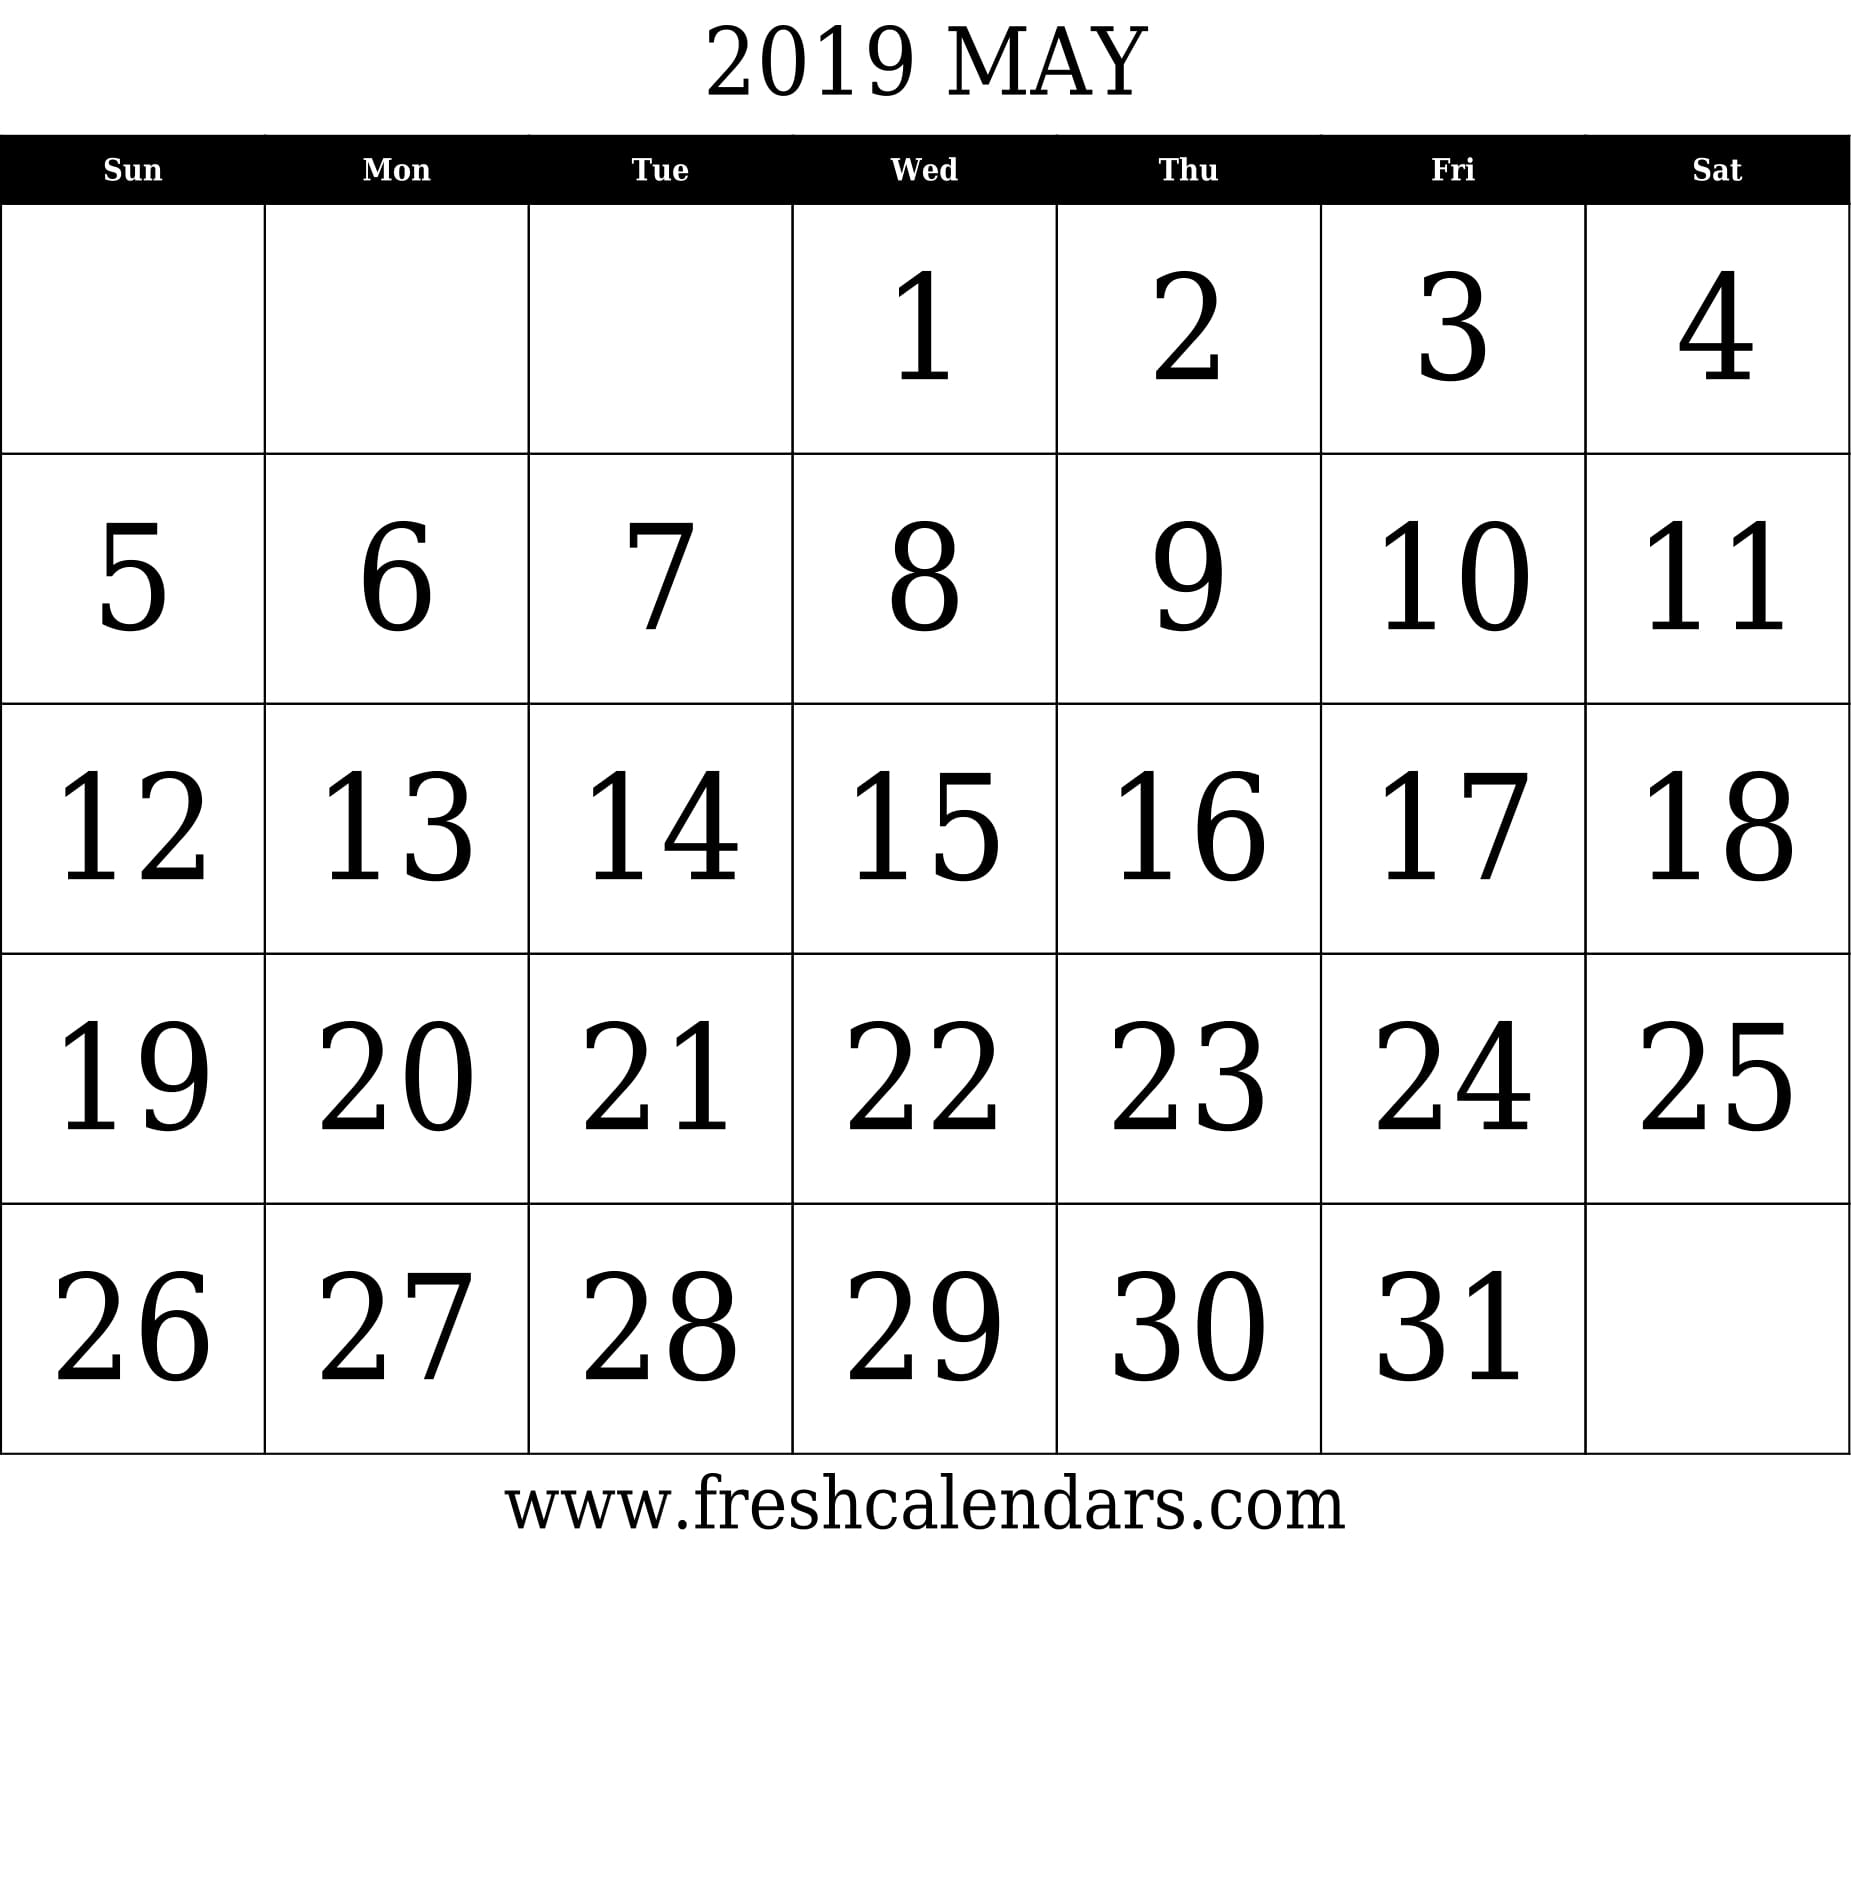 May 2019 Calendar With Large Dates